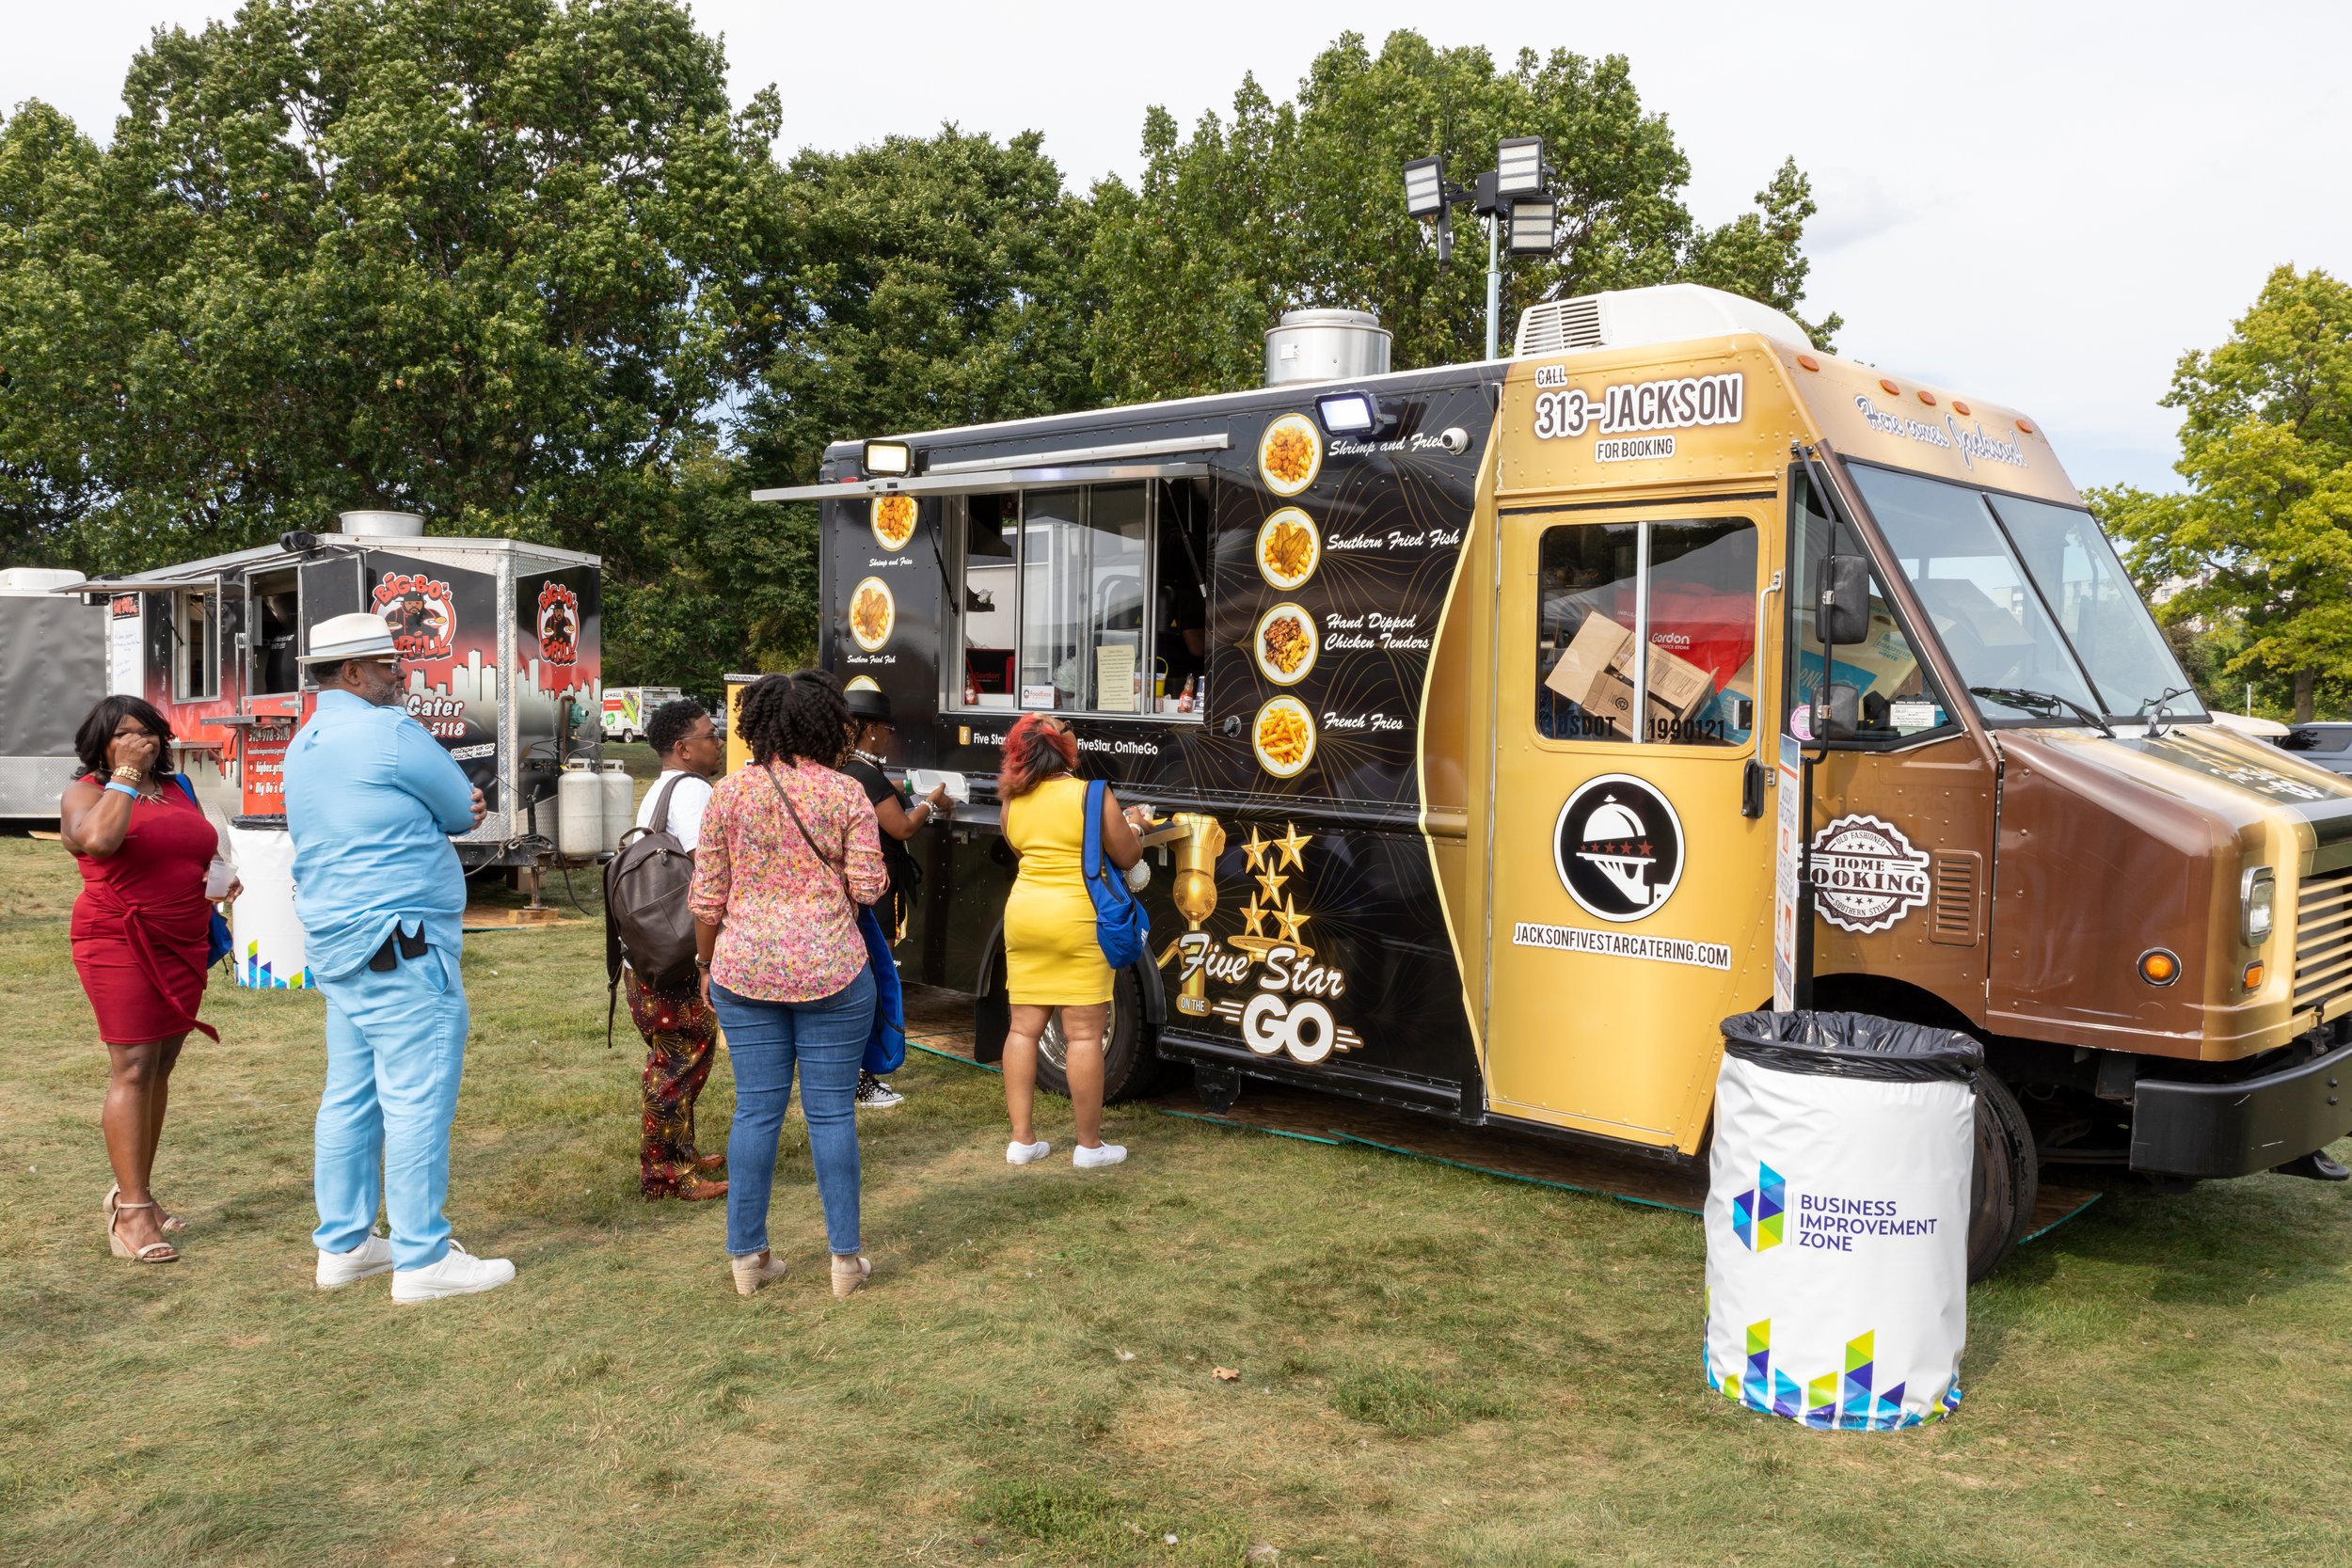  TASTY DISHES FROM MULTIPLE FOOD TRUCKS 